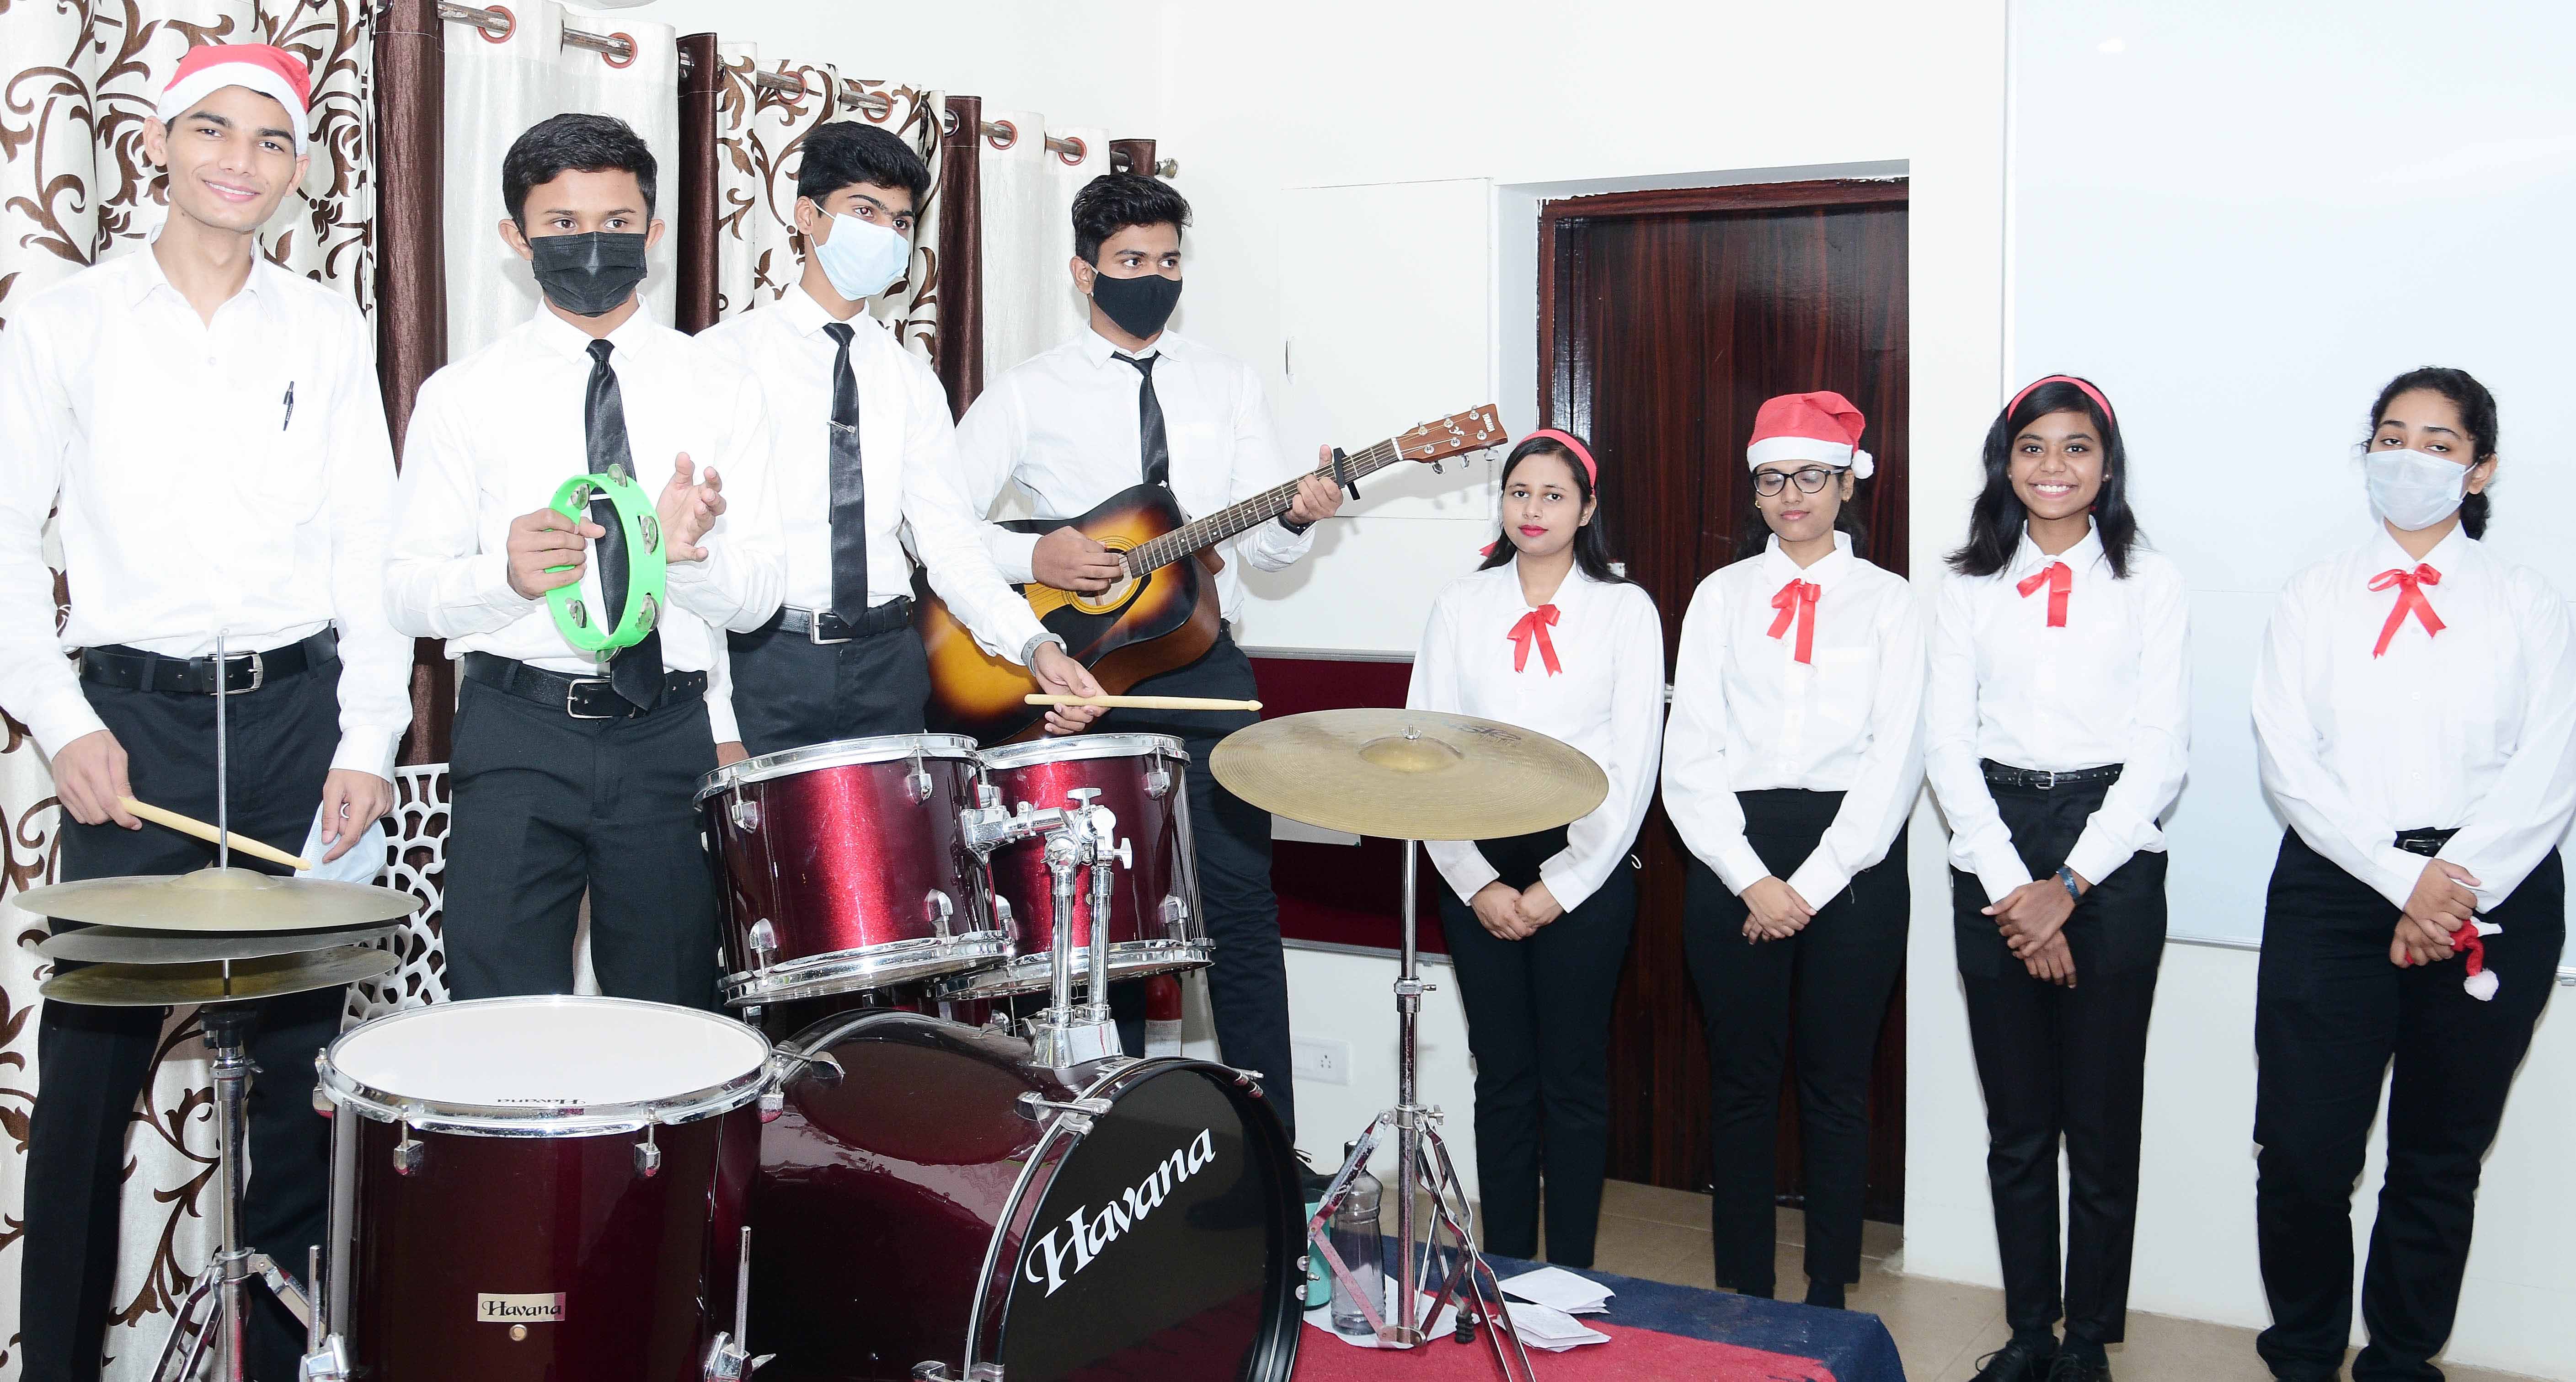 The Institute of Hotel Management rings in Christmas with pomp and gaiety!